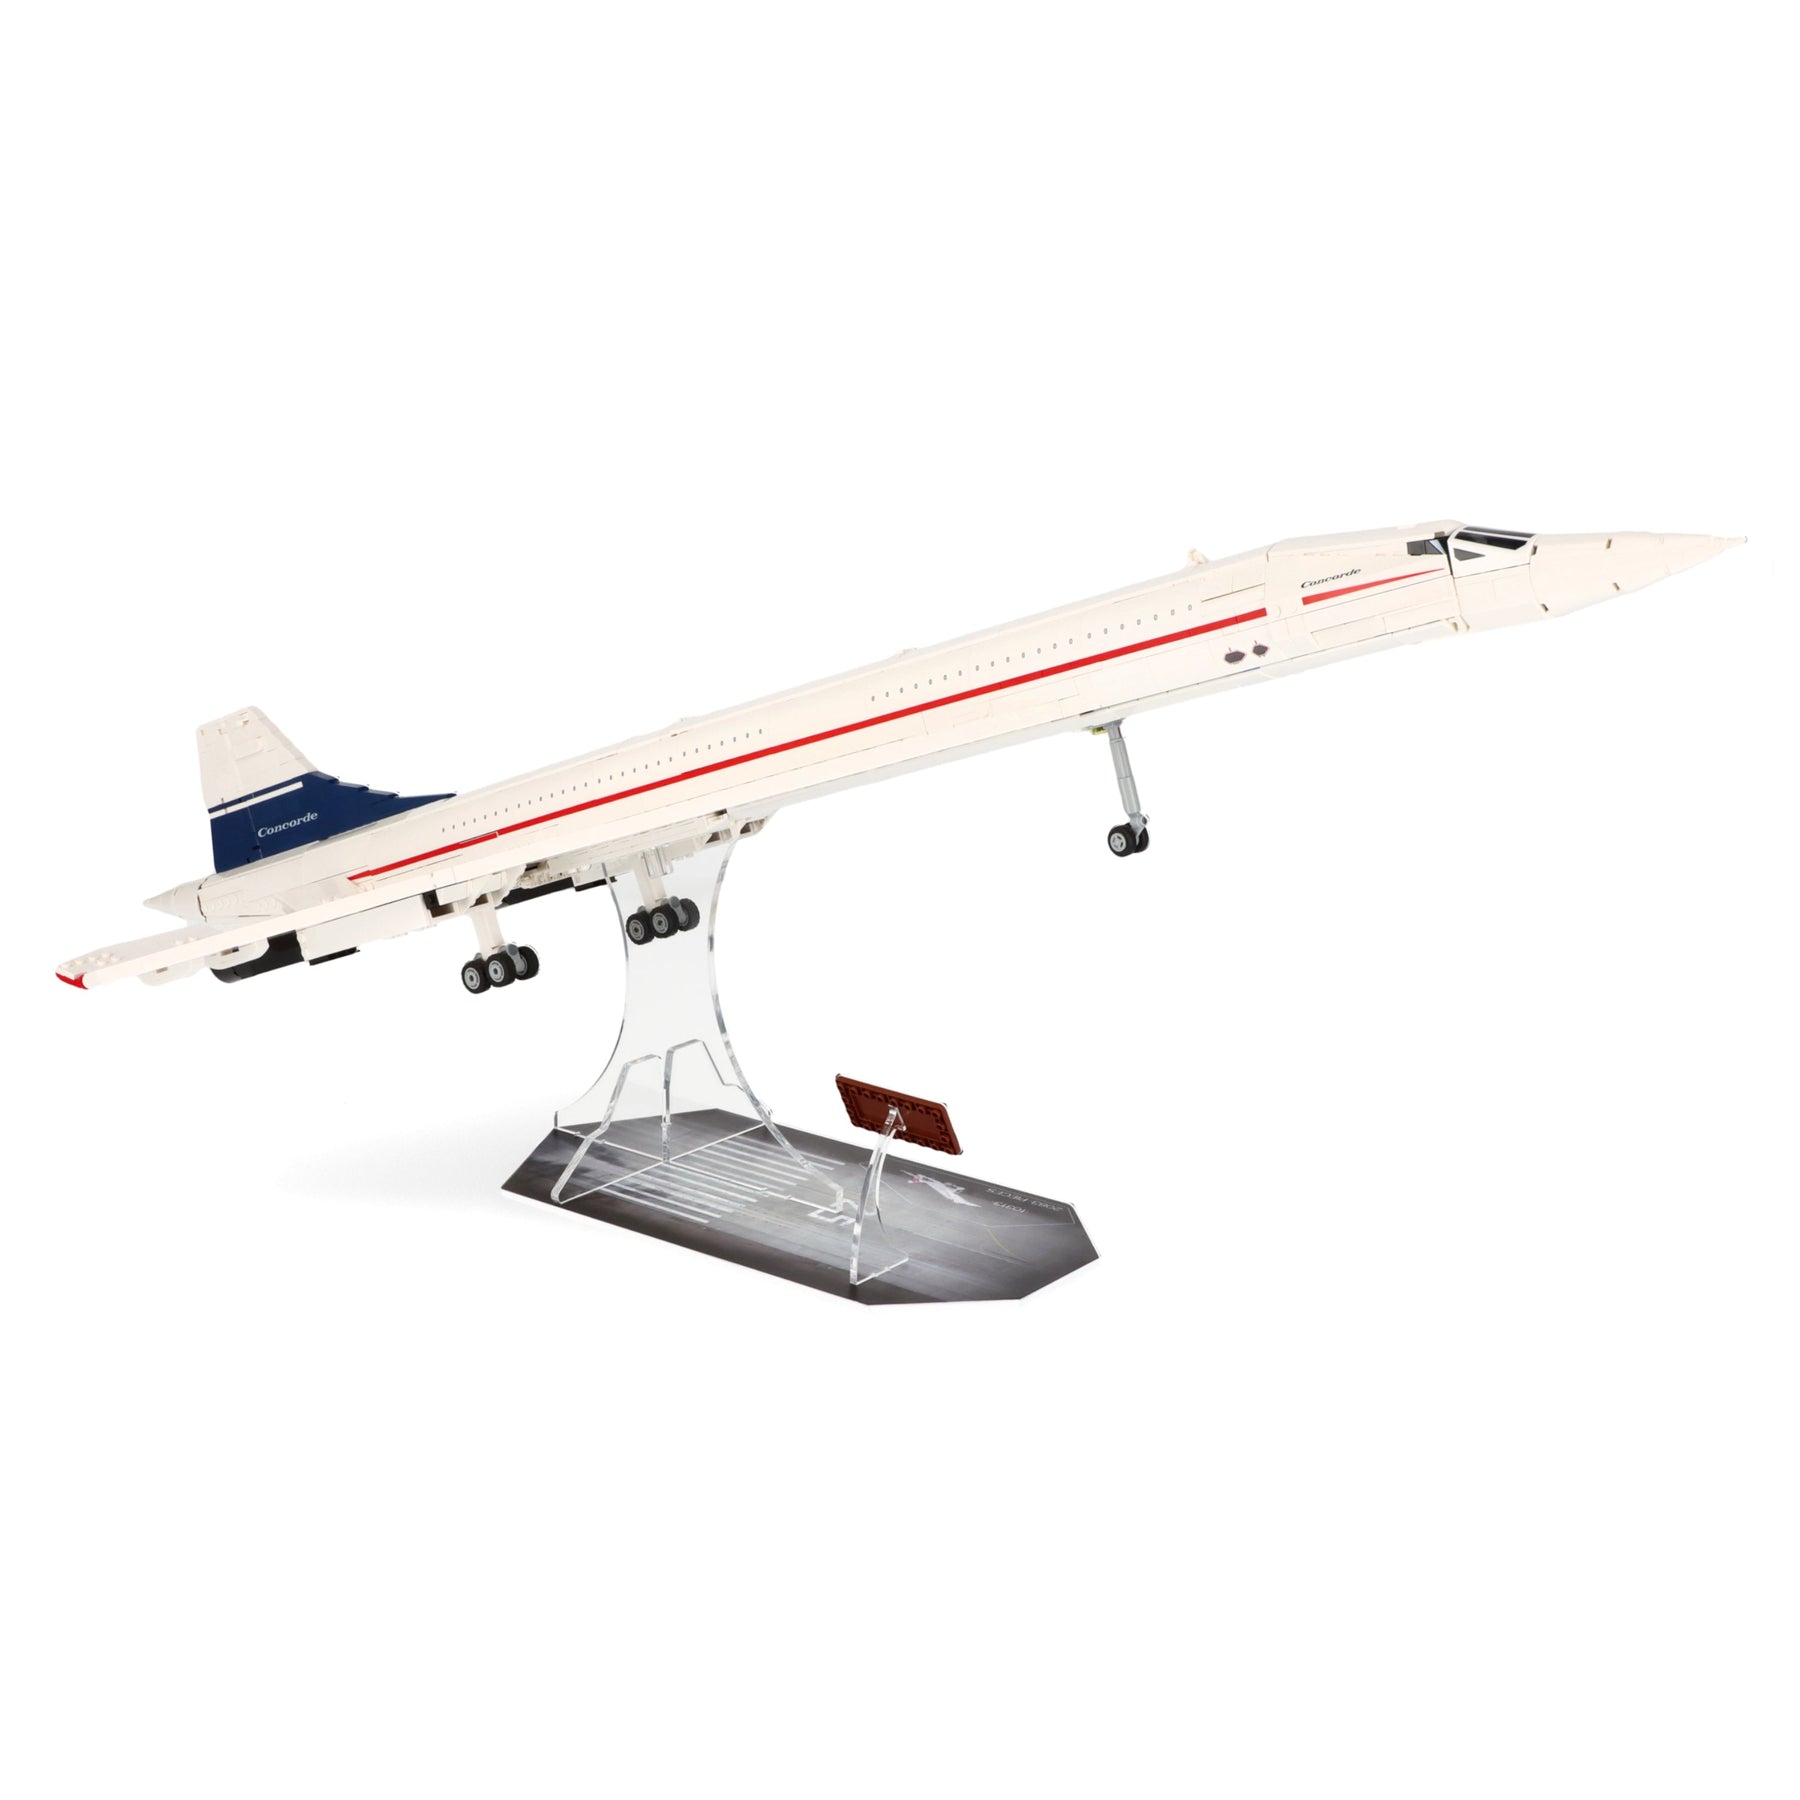 Lego 10318 Concorde Display Stand - Take Off